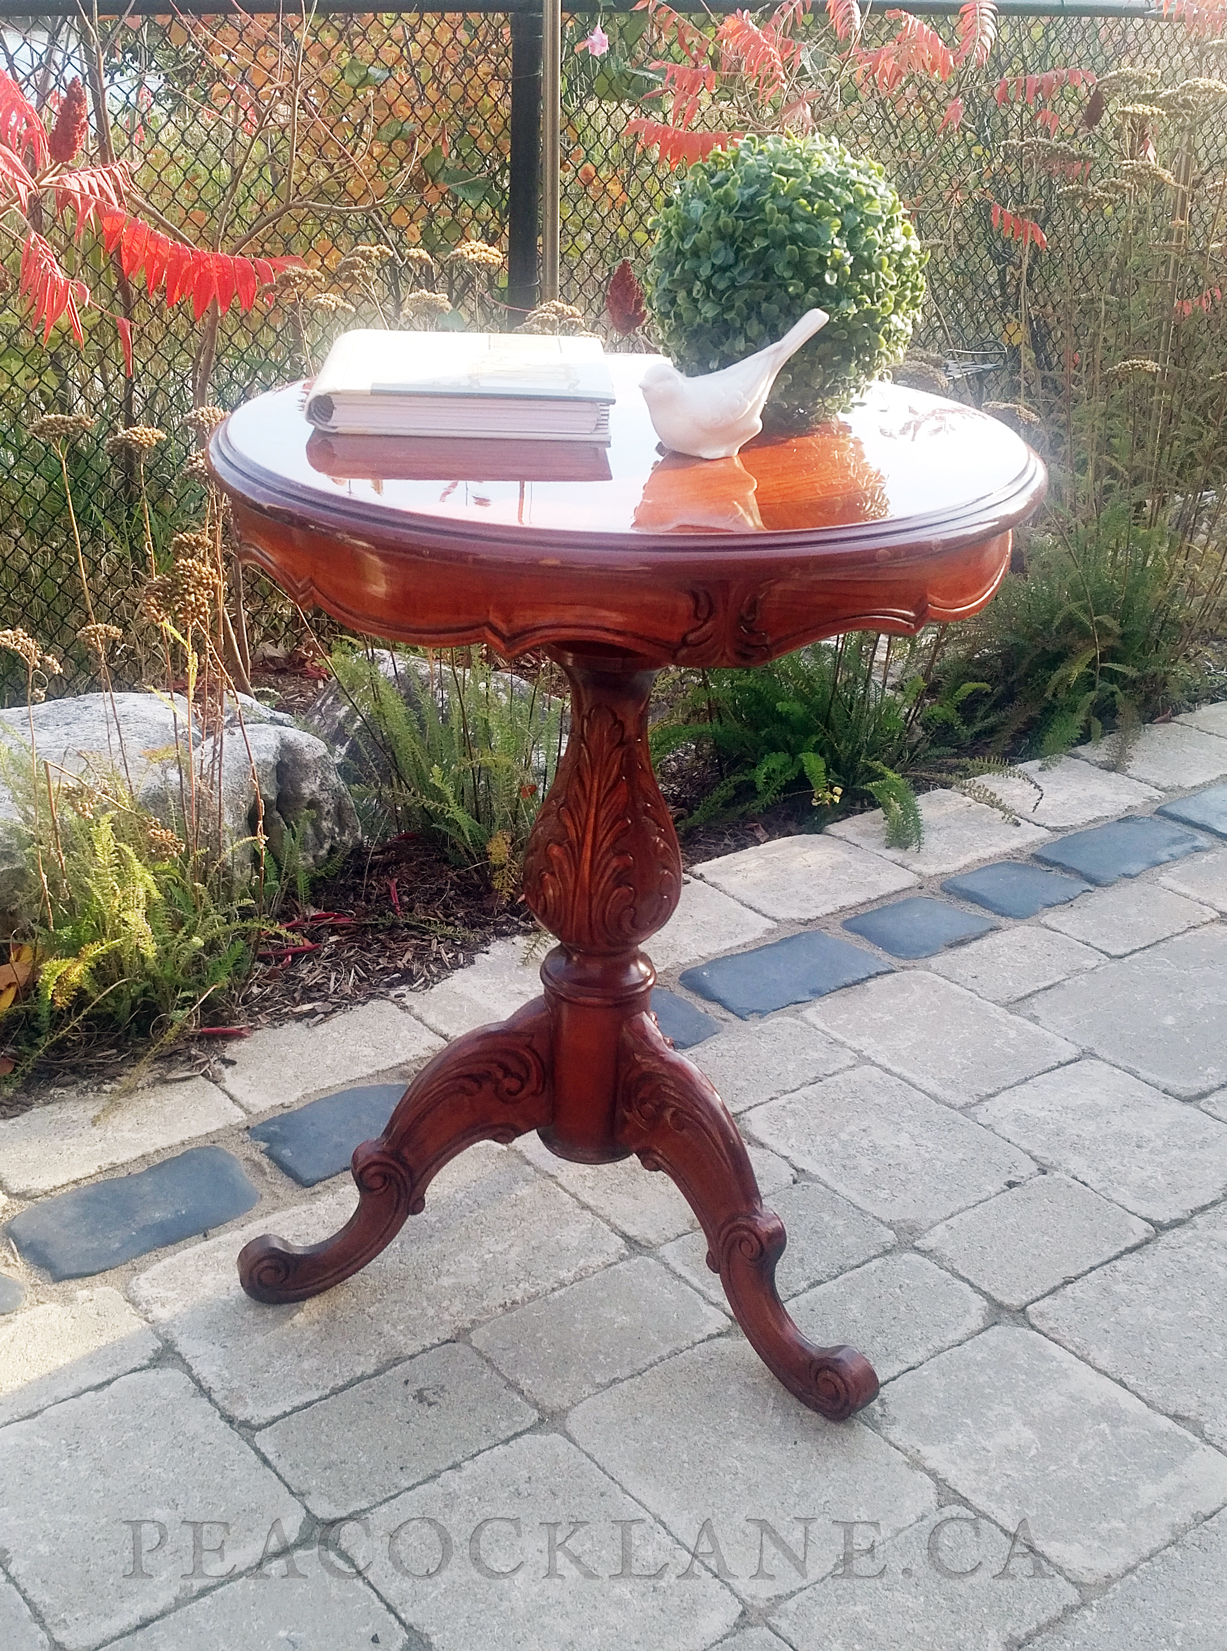 SOLD $180 - Antique Queen Anne Style Round Table